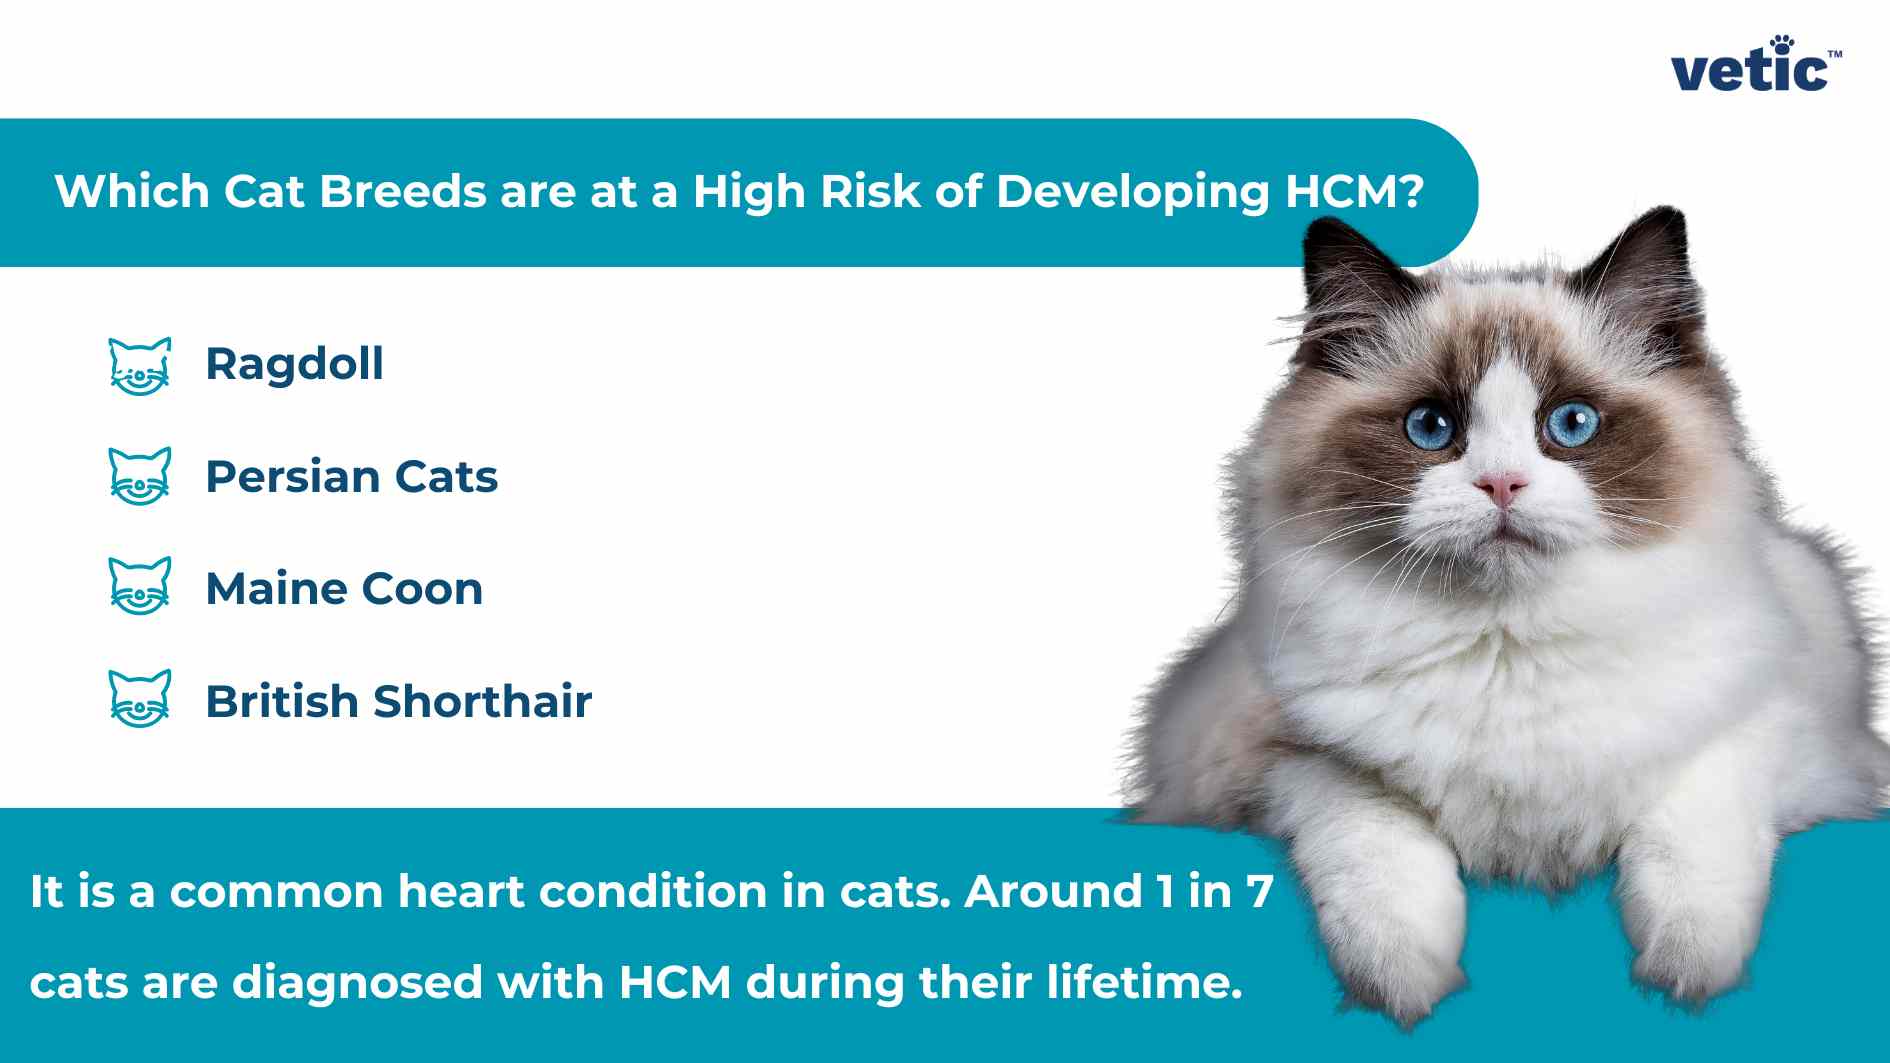 An informational image from Vetic about cat breeds at high risk of developing a specific heart condition, with a list of breeds and additional information on the condition. Description: The image is primarily informational, presented in a visual format with text and icons. The top section has a teal background with white text stating “Which Cat Breeds are at a High Risk of Developing” (the rest is cut off but likely refers to a specific health condition). Below this headline, there’s a list of four cat breeds: Ragdoll, Persian Cats, Maine Coon, and British Shorthair. Each breed name is accompanied by an icon of a cat’s face. A large blurred area obscures part of the image; it seems like an illustration or photo was originally there. At the bottom, there’s more text on the teal background explaining that this is a common heart condition in cats and providing statistics about its prevalence. The logo “vetic” appears in the top right corner.